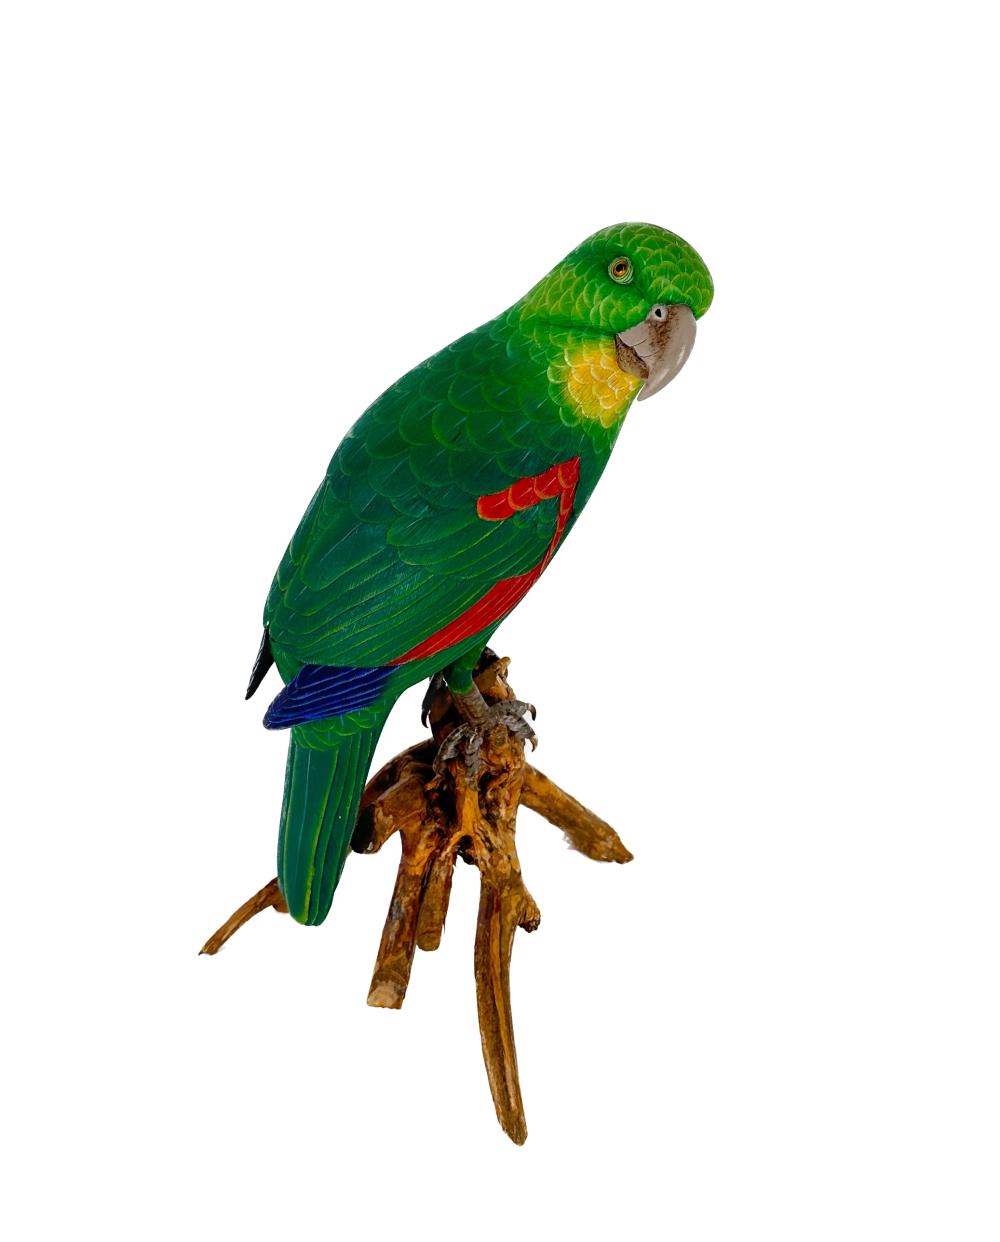 DECORATIVE CARVED WOODEN PARROT 352856